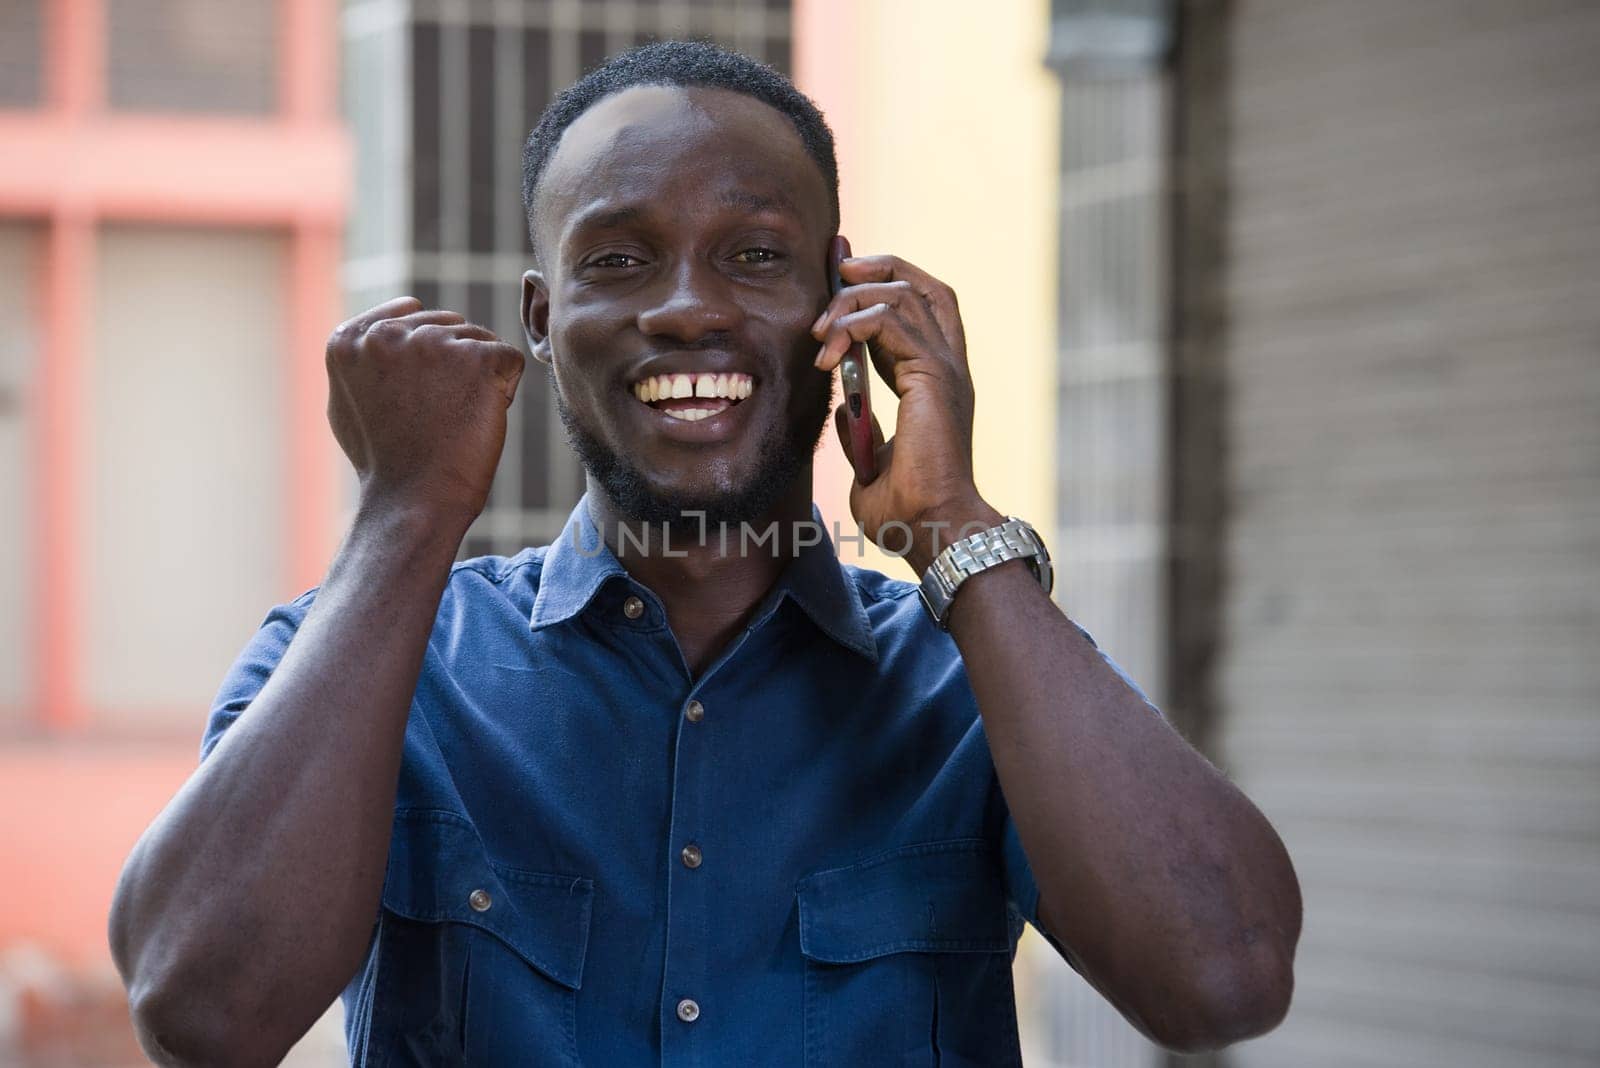 Photo of handsome excited man expressing surprise on face and gesturing while talking on the phone standing outside